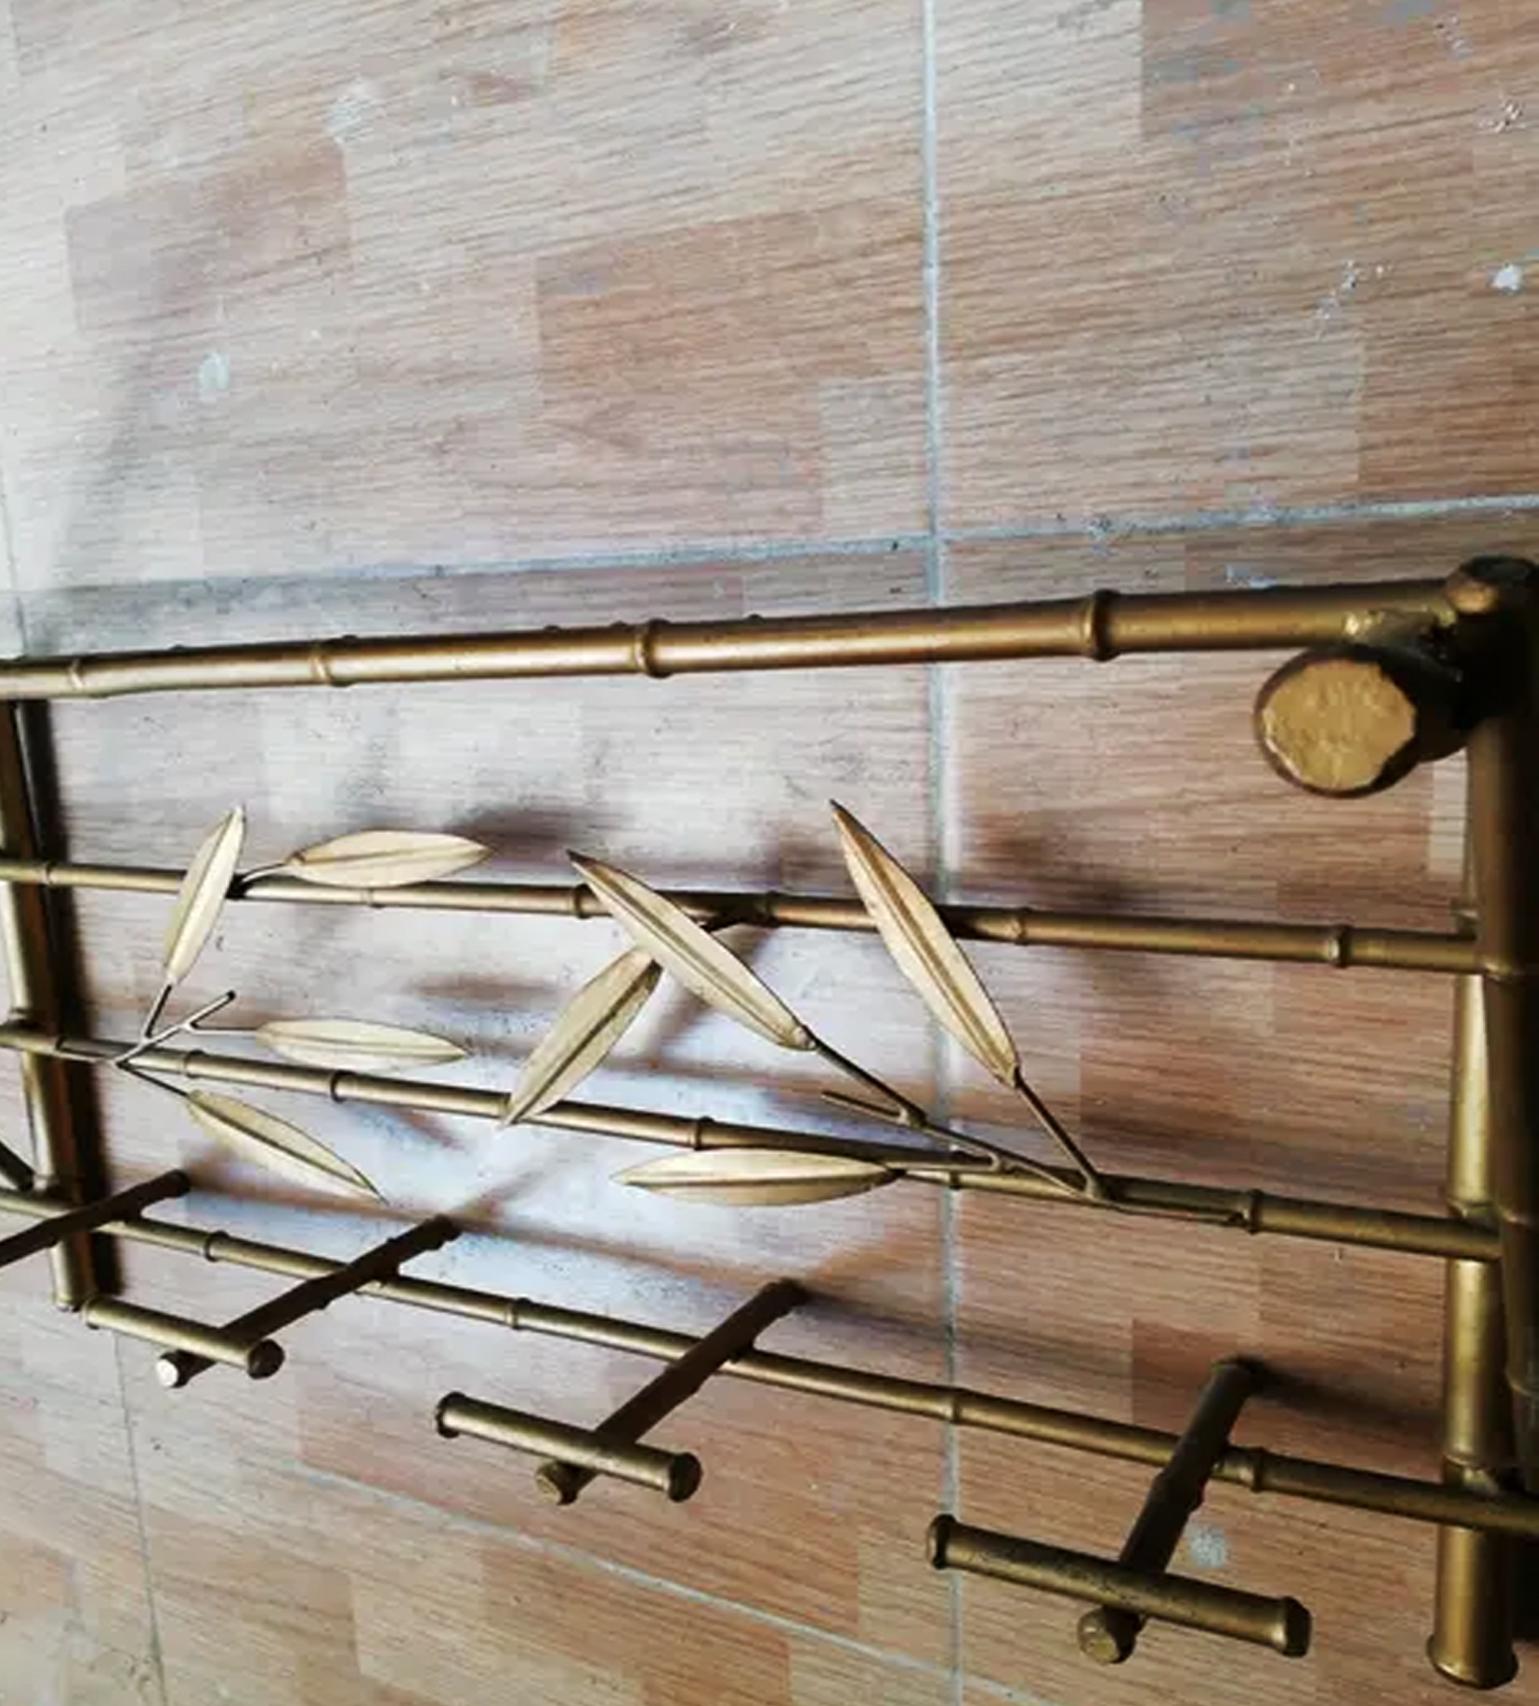 Wall coat rack faux bamboo Holliwood Regency Style. Golden iron with decorated leaves
 It has 4 hangers and an upper space to put hats or bags when you enter your home.
t is an Iron wall coat rack with gold leaf, with a design of Leaves embedded in